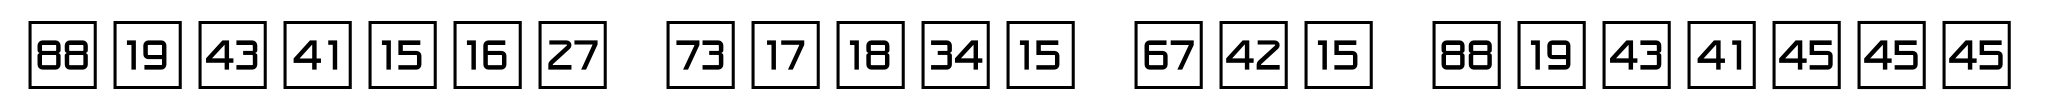 Numbers Style One Numbers Style One Square Positive image